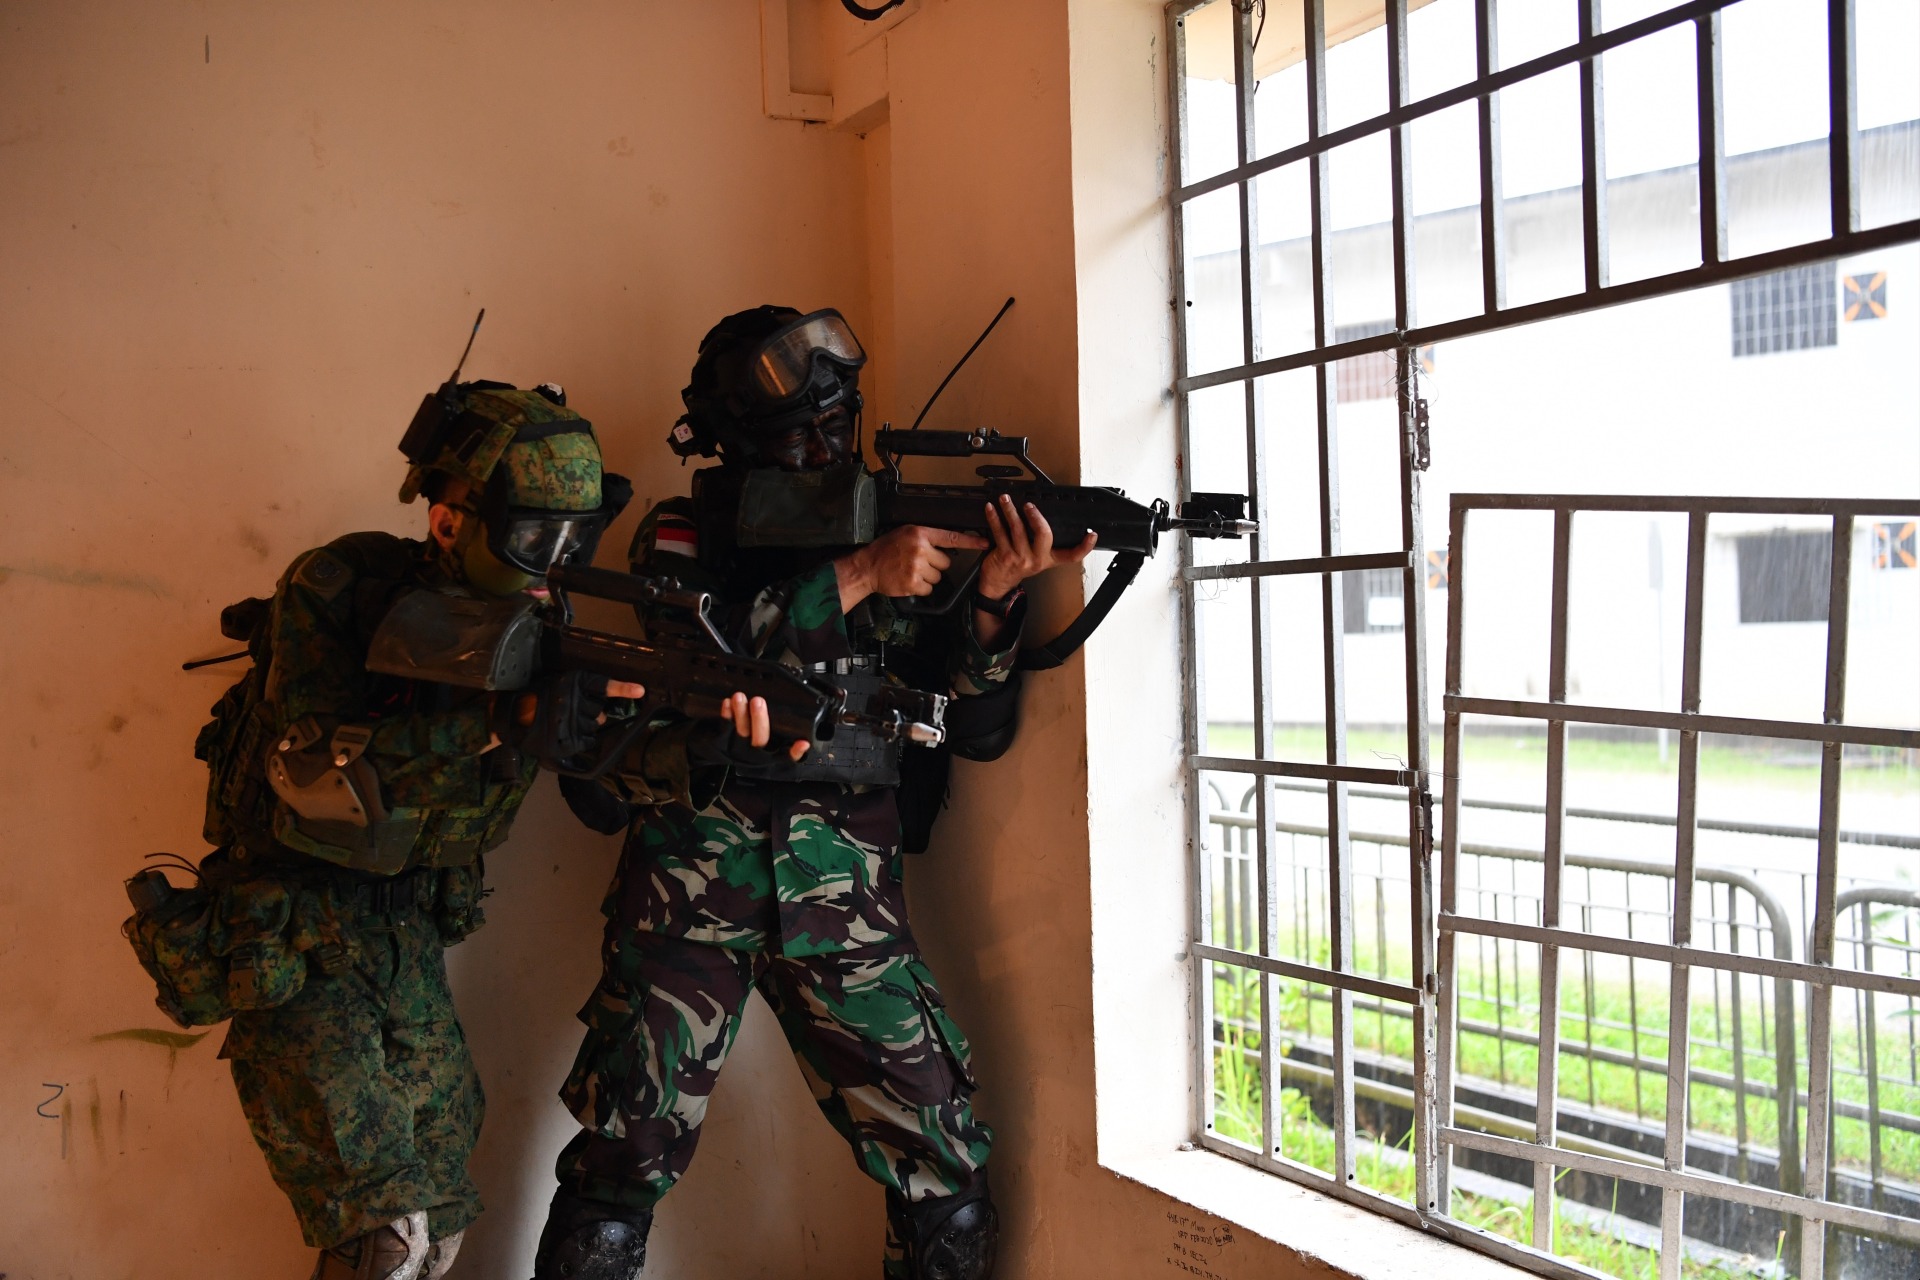 Soldiers from the Singapore Army and the Indonesia Army (TNI-AD) working together to secure the urban objective.